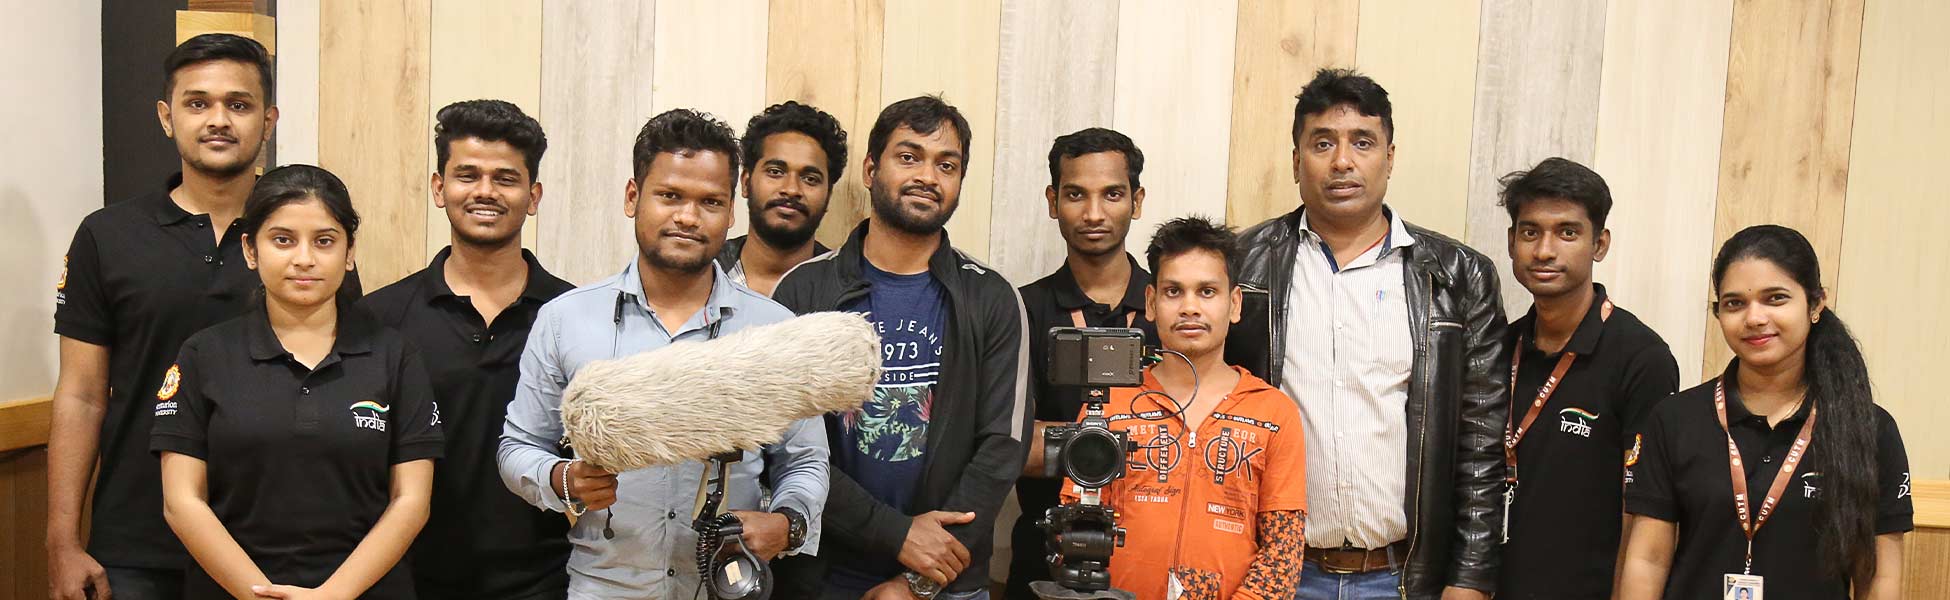 film production services in Narayanpet , video production services in Narayanpet, tv production services in Narayanpet, production services in Narayanpet